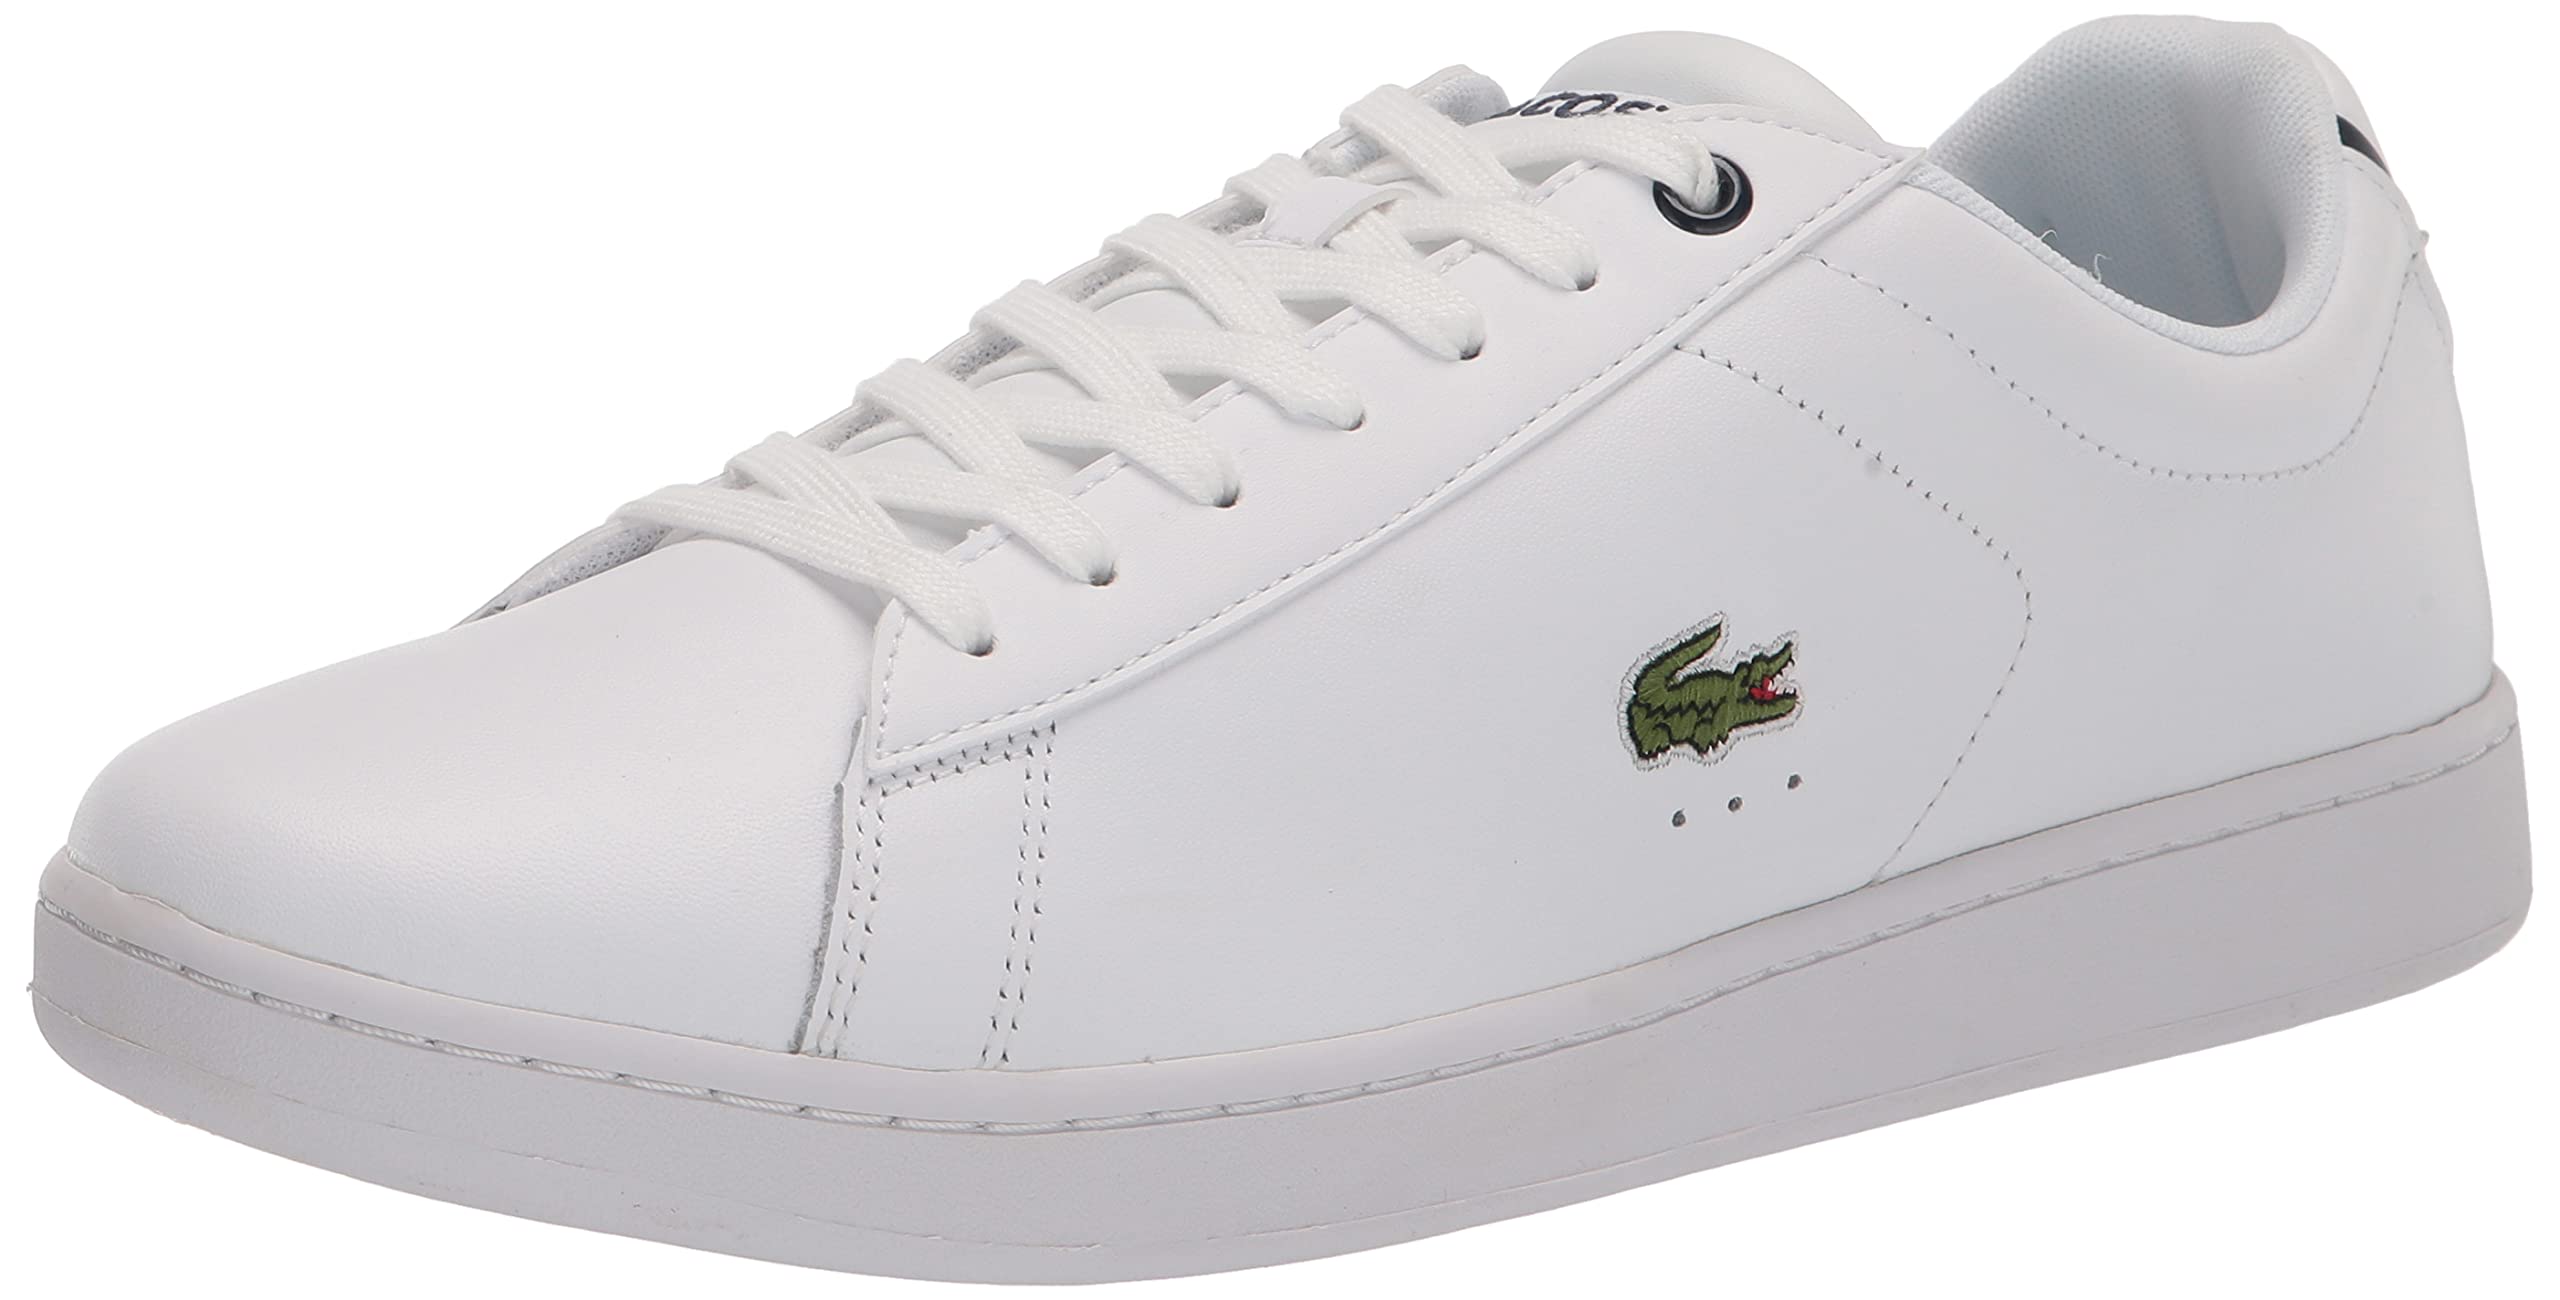 Lacoste Carnaby Pro 222 1 SMA - Tenis